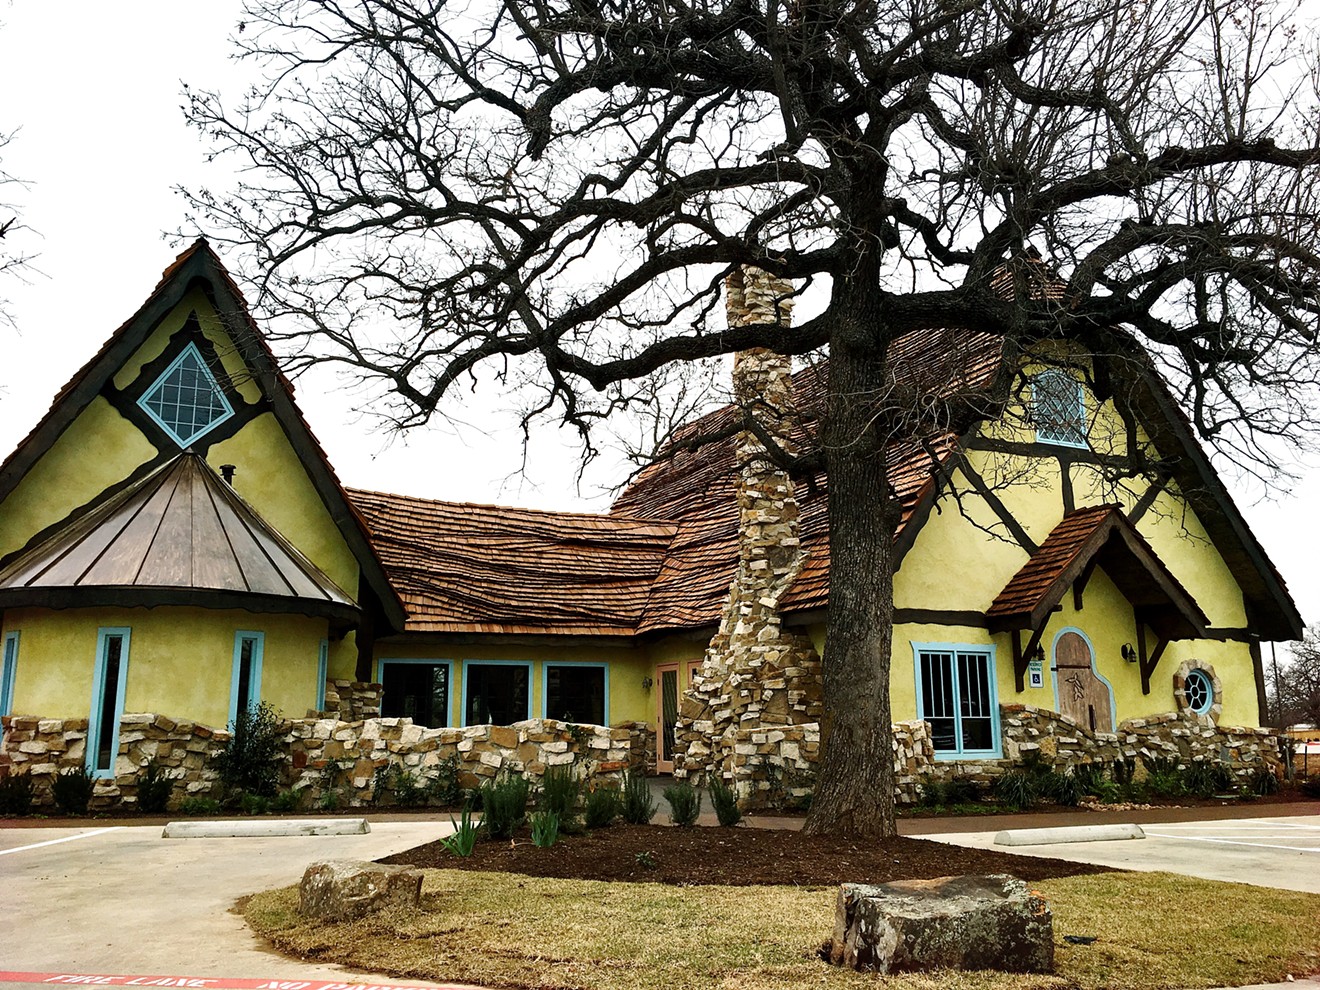 Kimzey’s Coffee opens in Argyle this week. The building’s architecture was heavily inspired by Hugh Comstock’s fairy tale cottages by the sea.